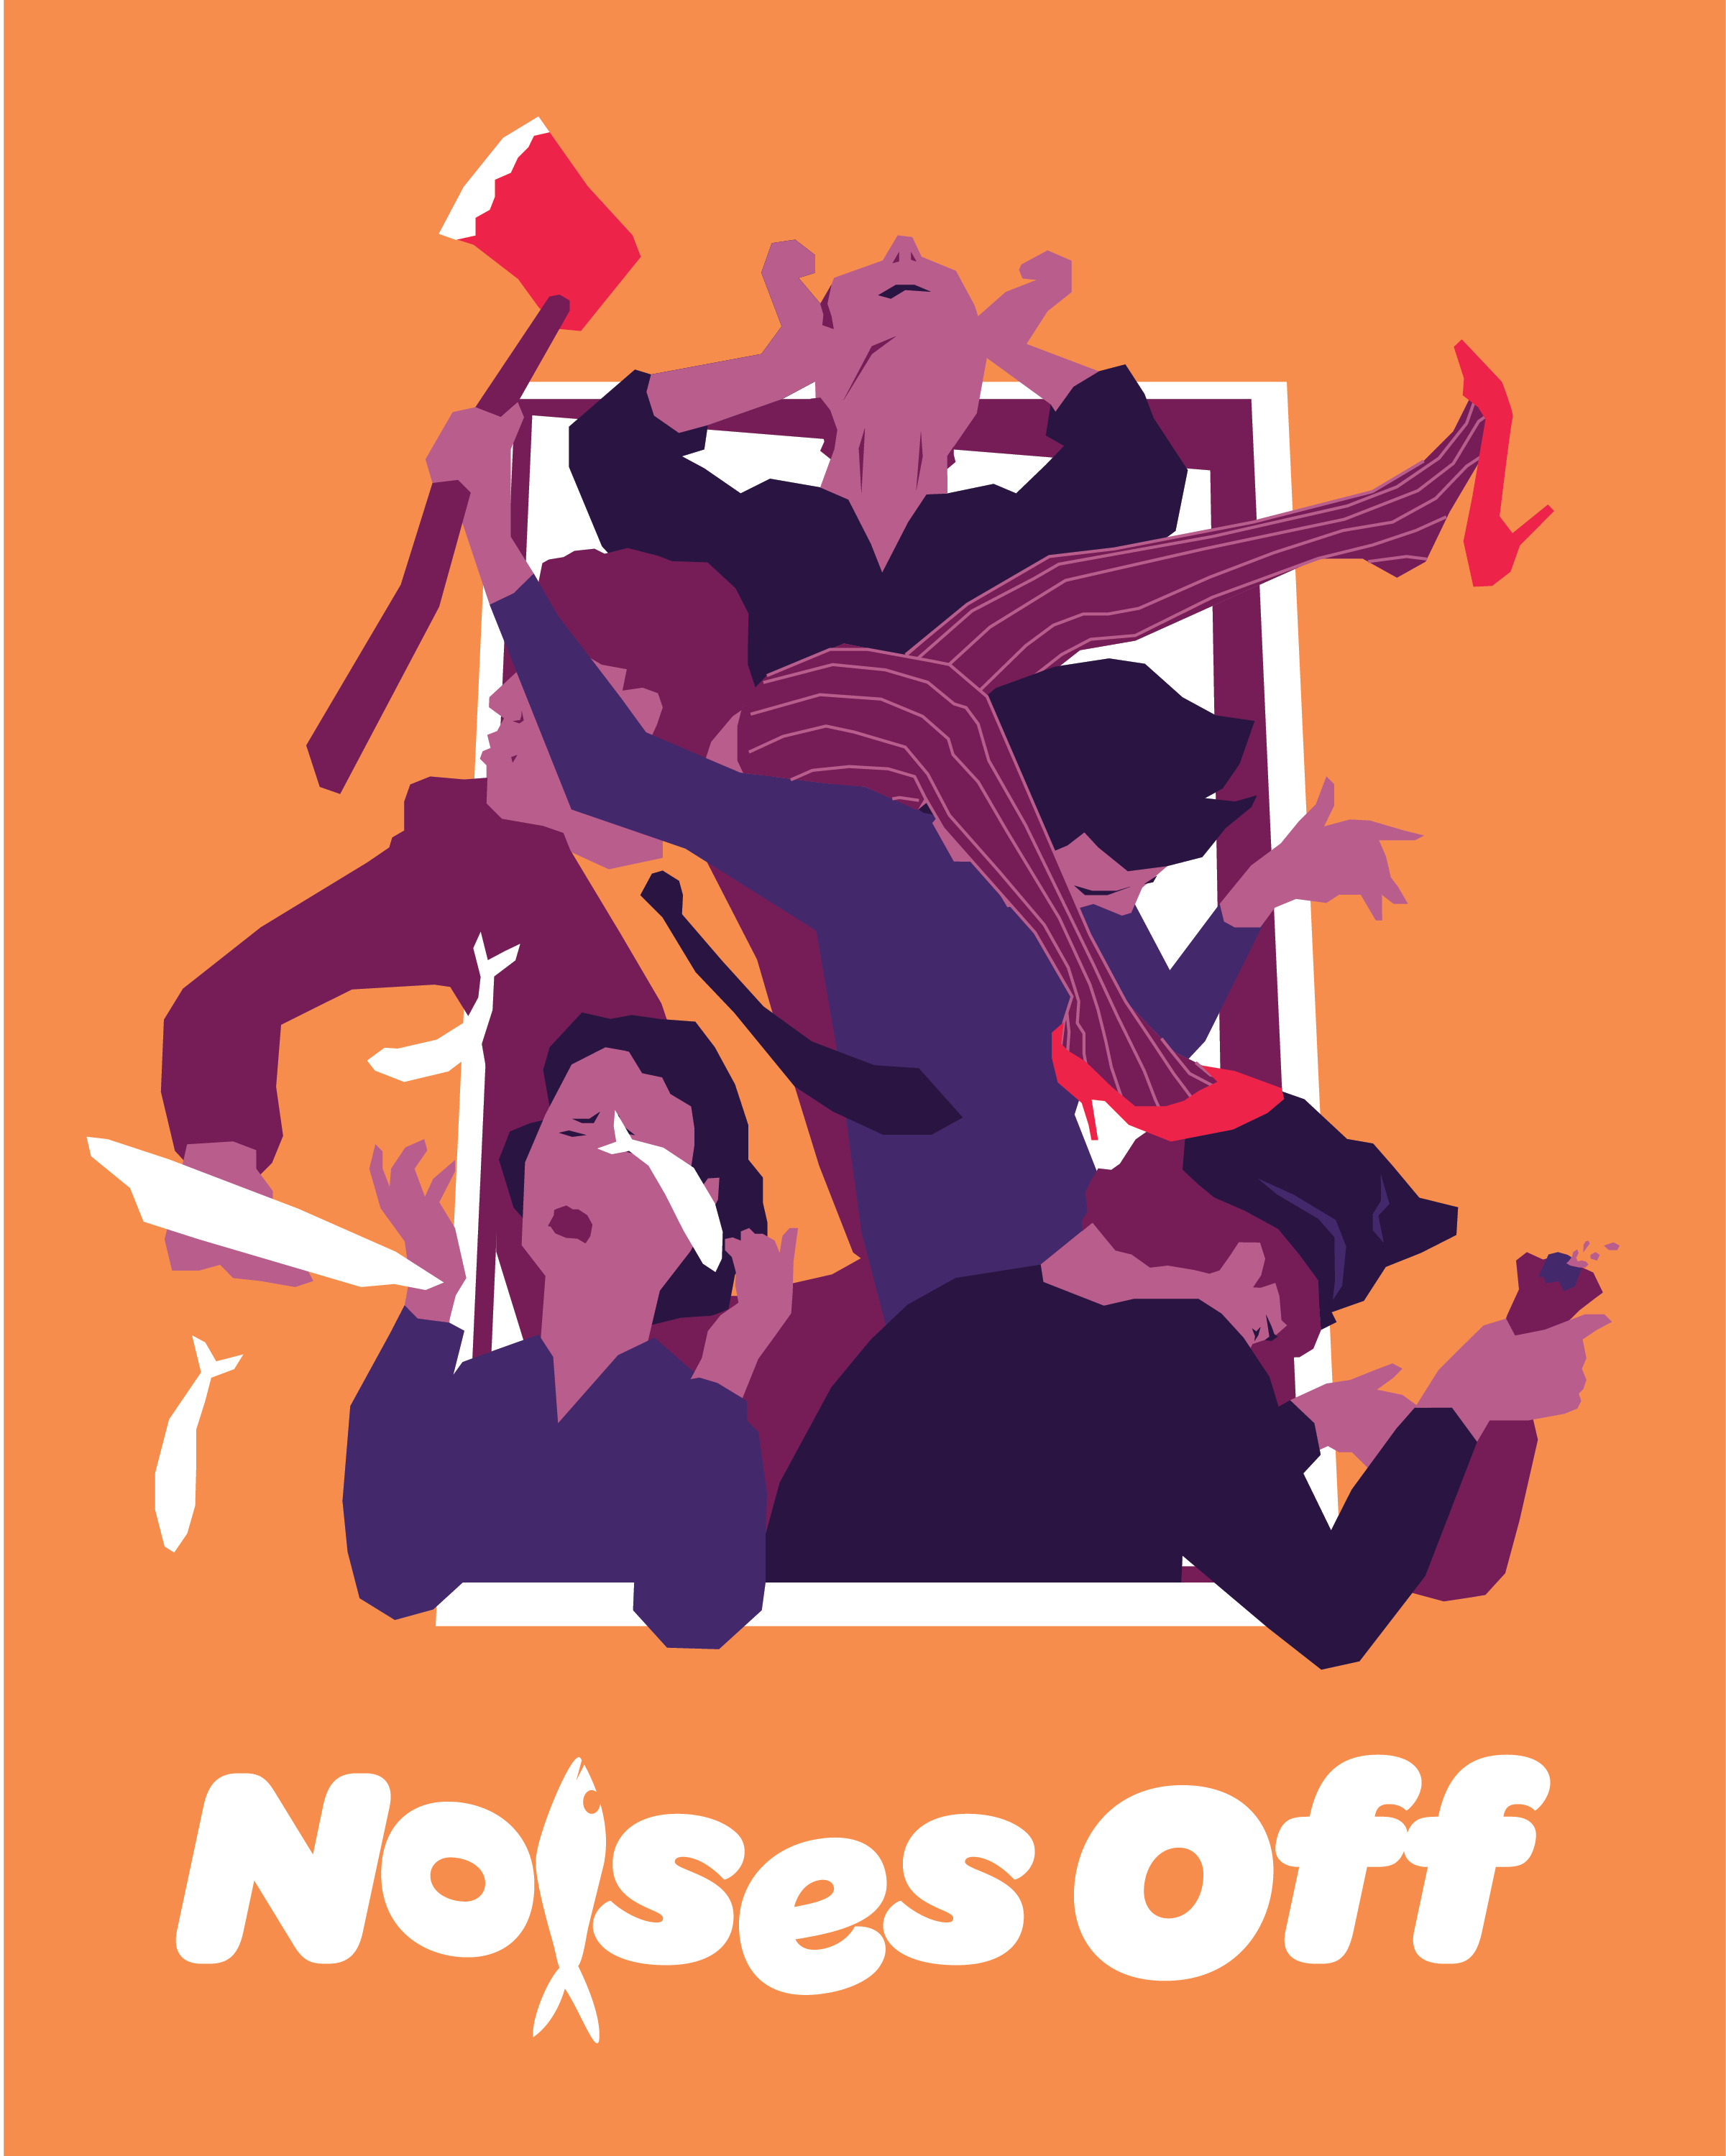 Noises Off - Visual Identity and Branding